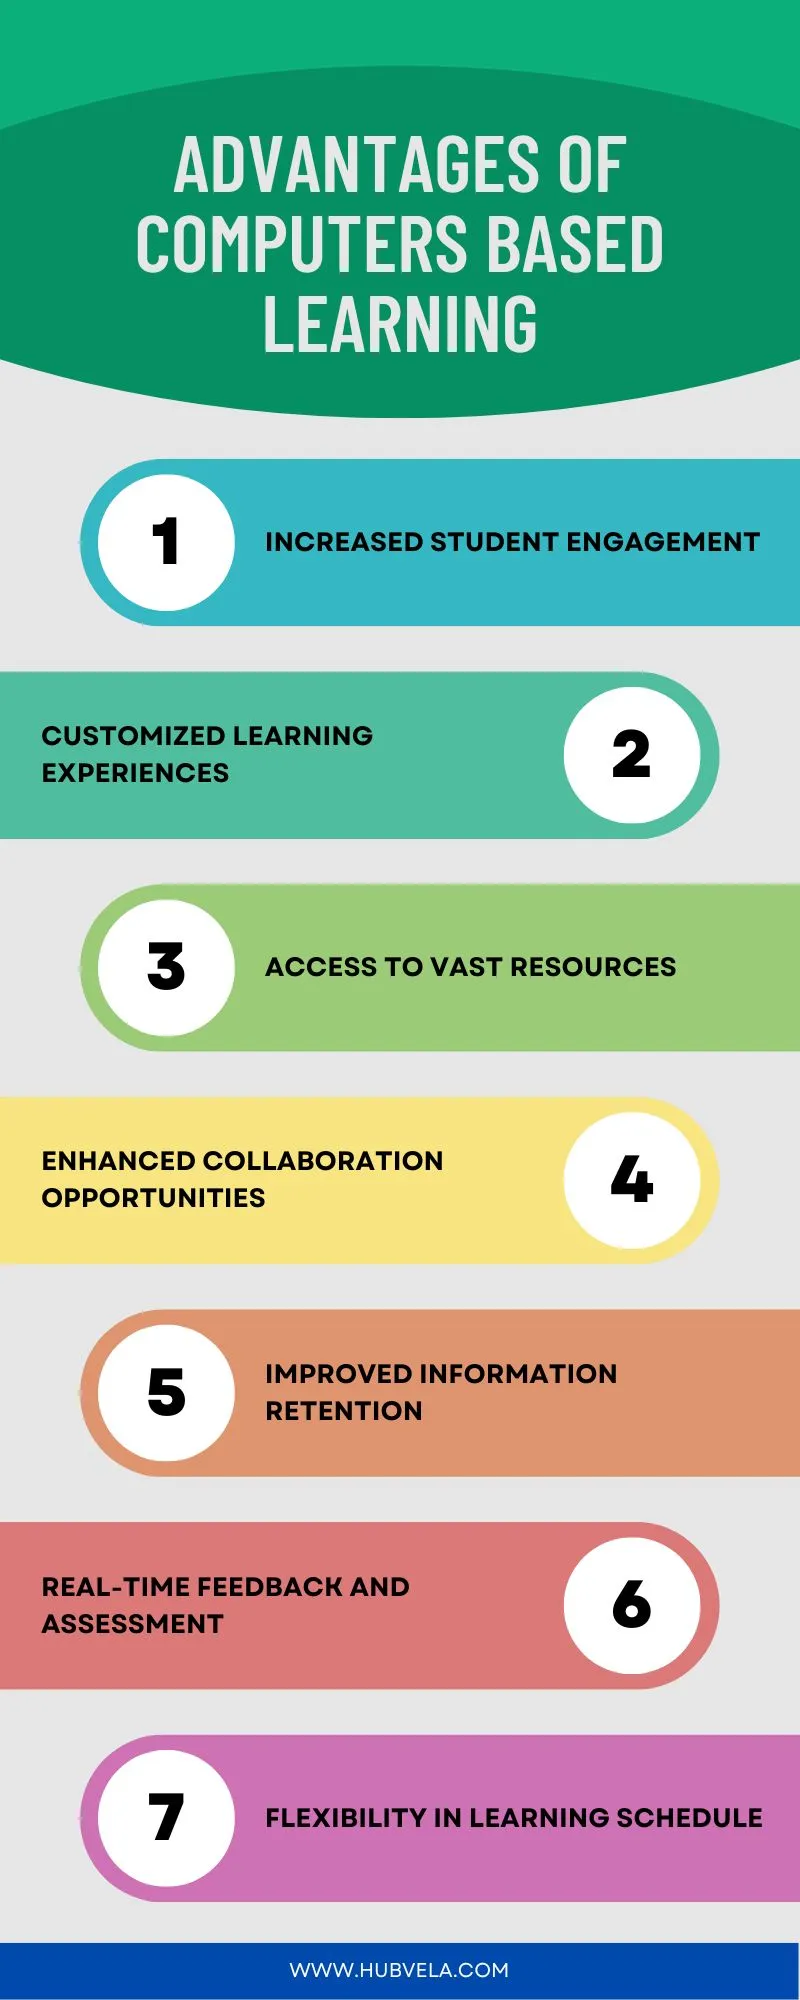 Advantages of Computers Based Learning Infographic